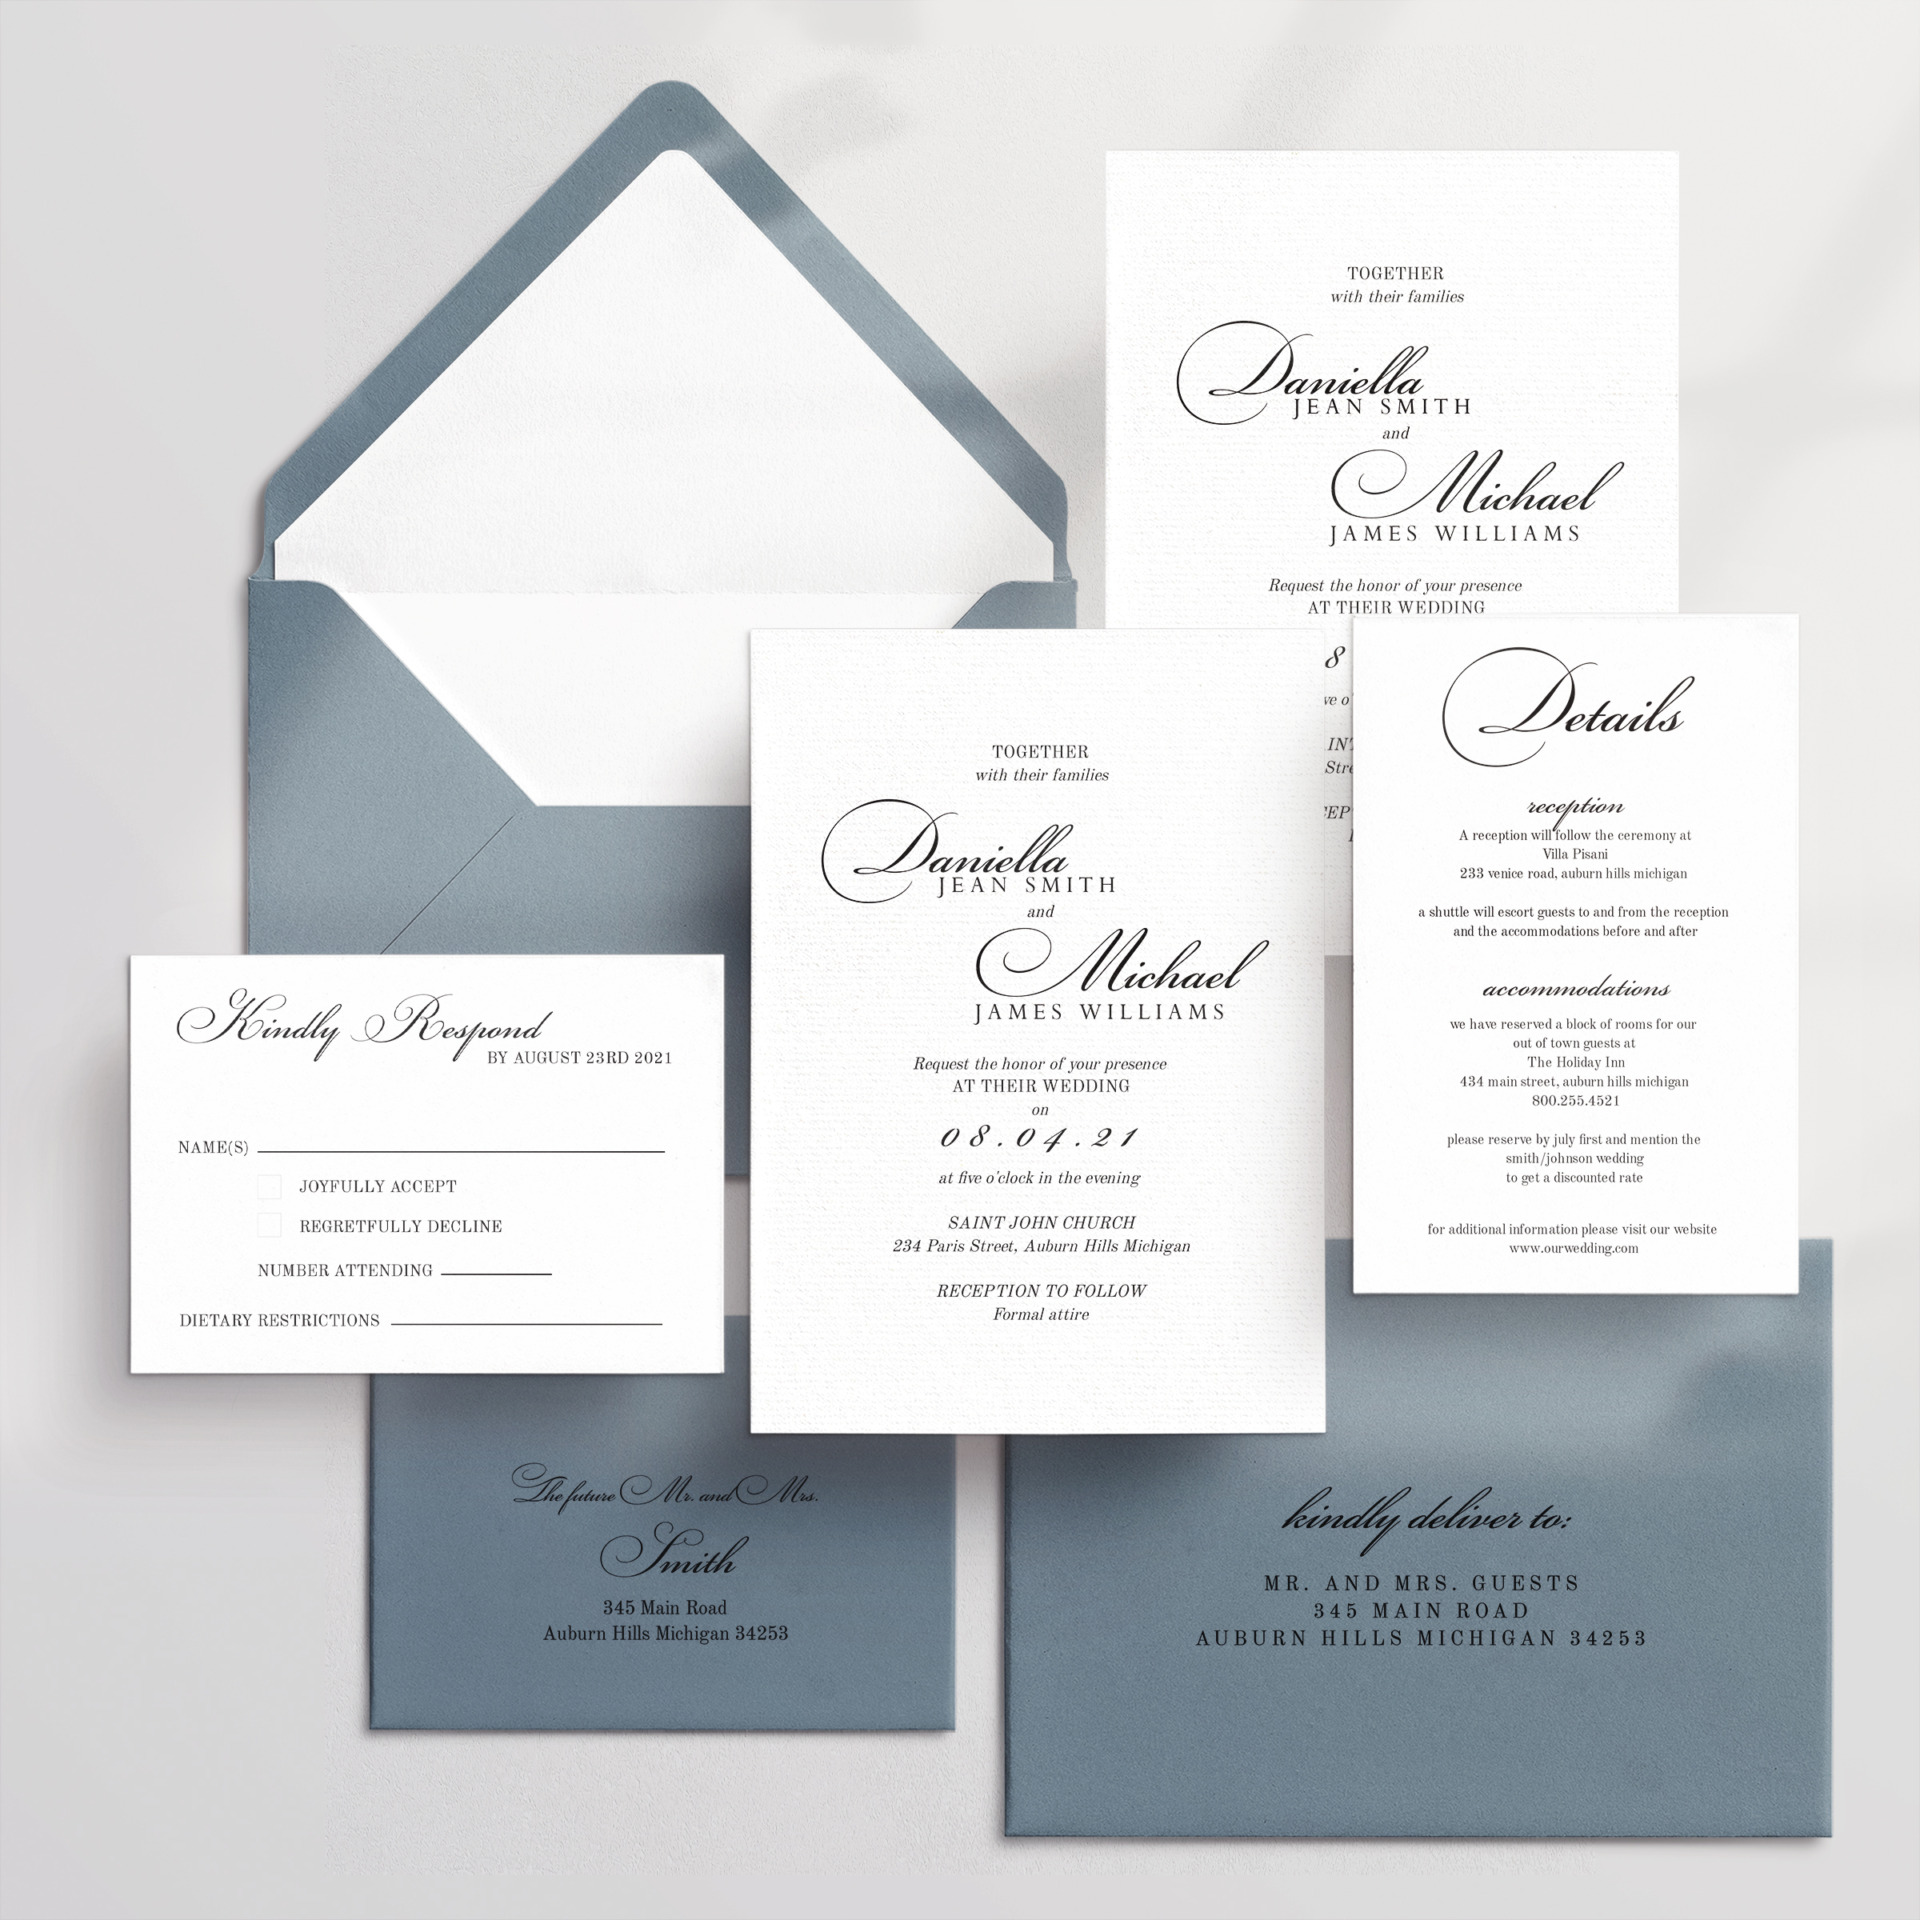 [vc_row][vc_column][vc_column_text]Purchase this listing to get a sample of our Mina wedding invitation suite.

The sample includes:

• 5.25